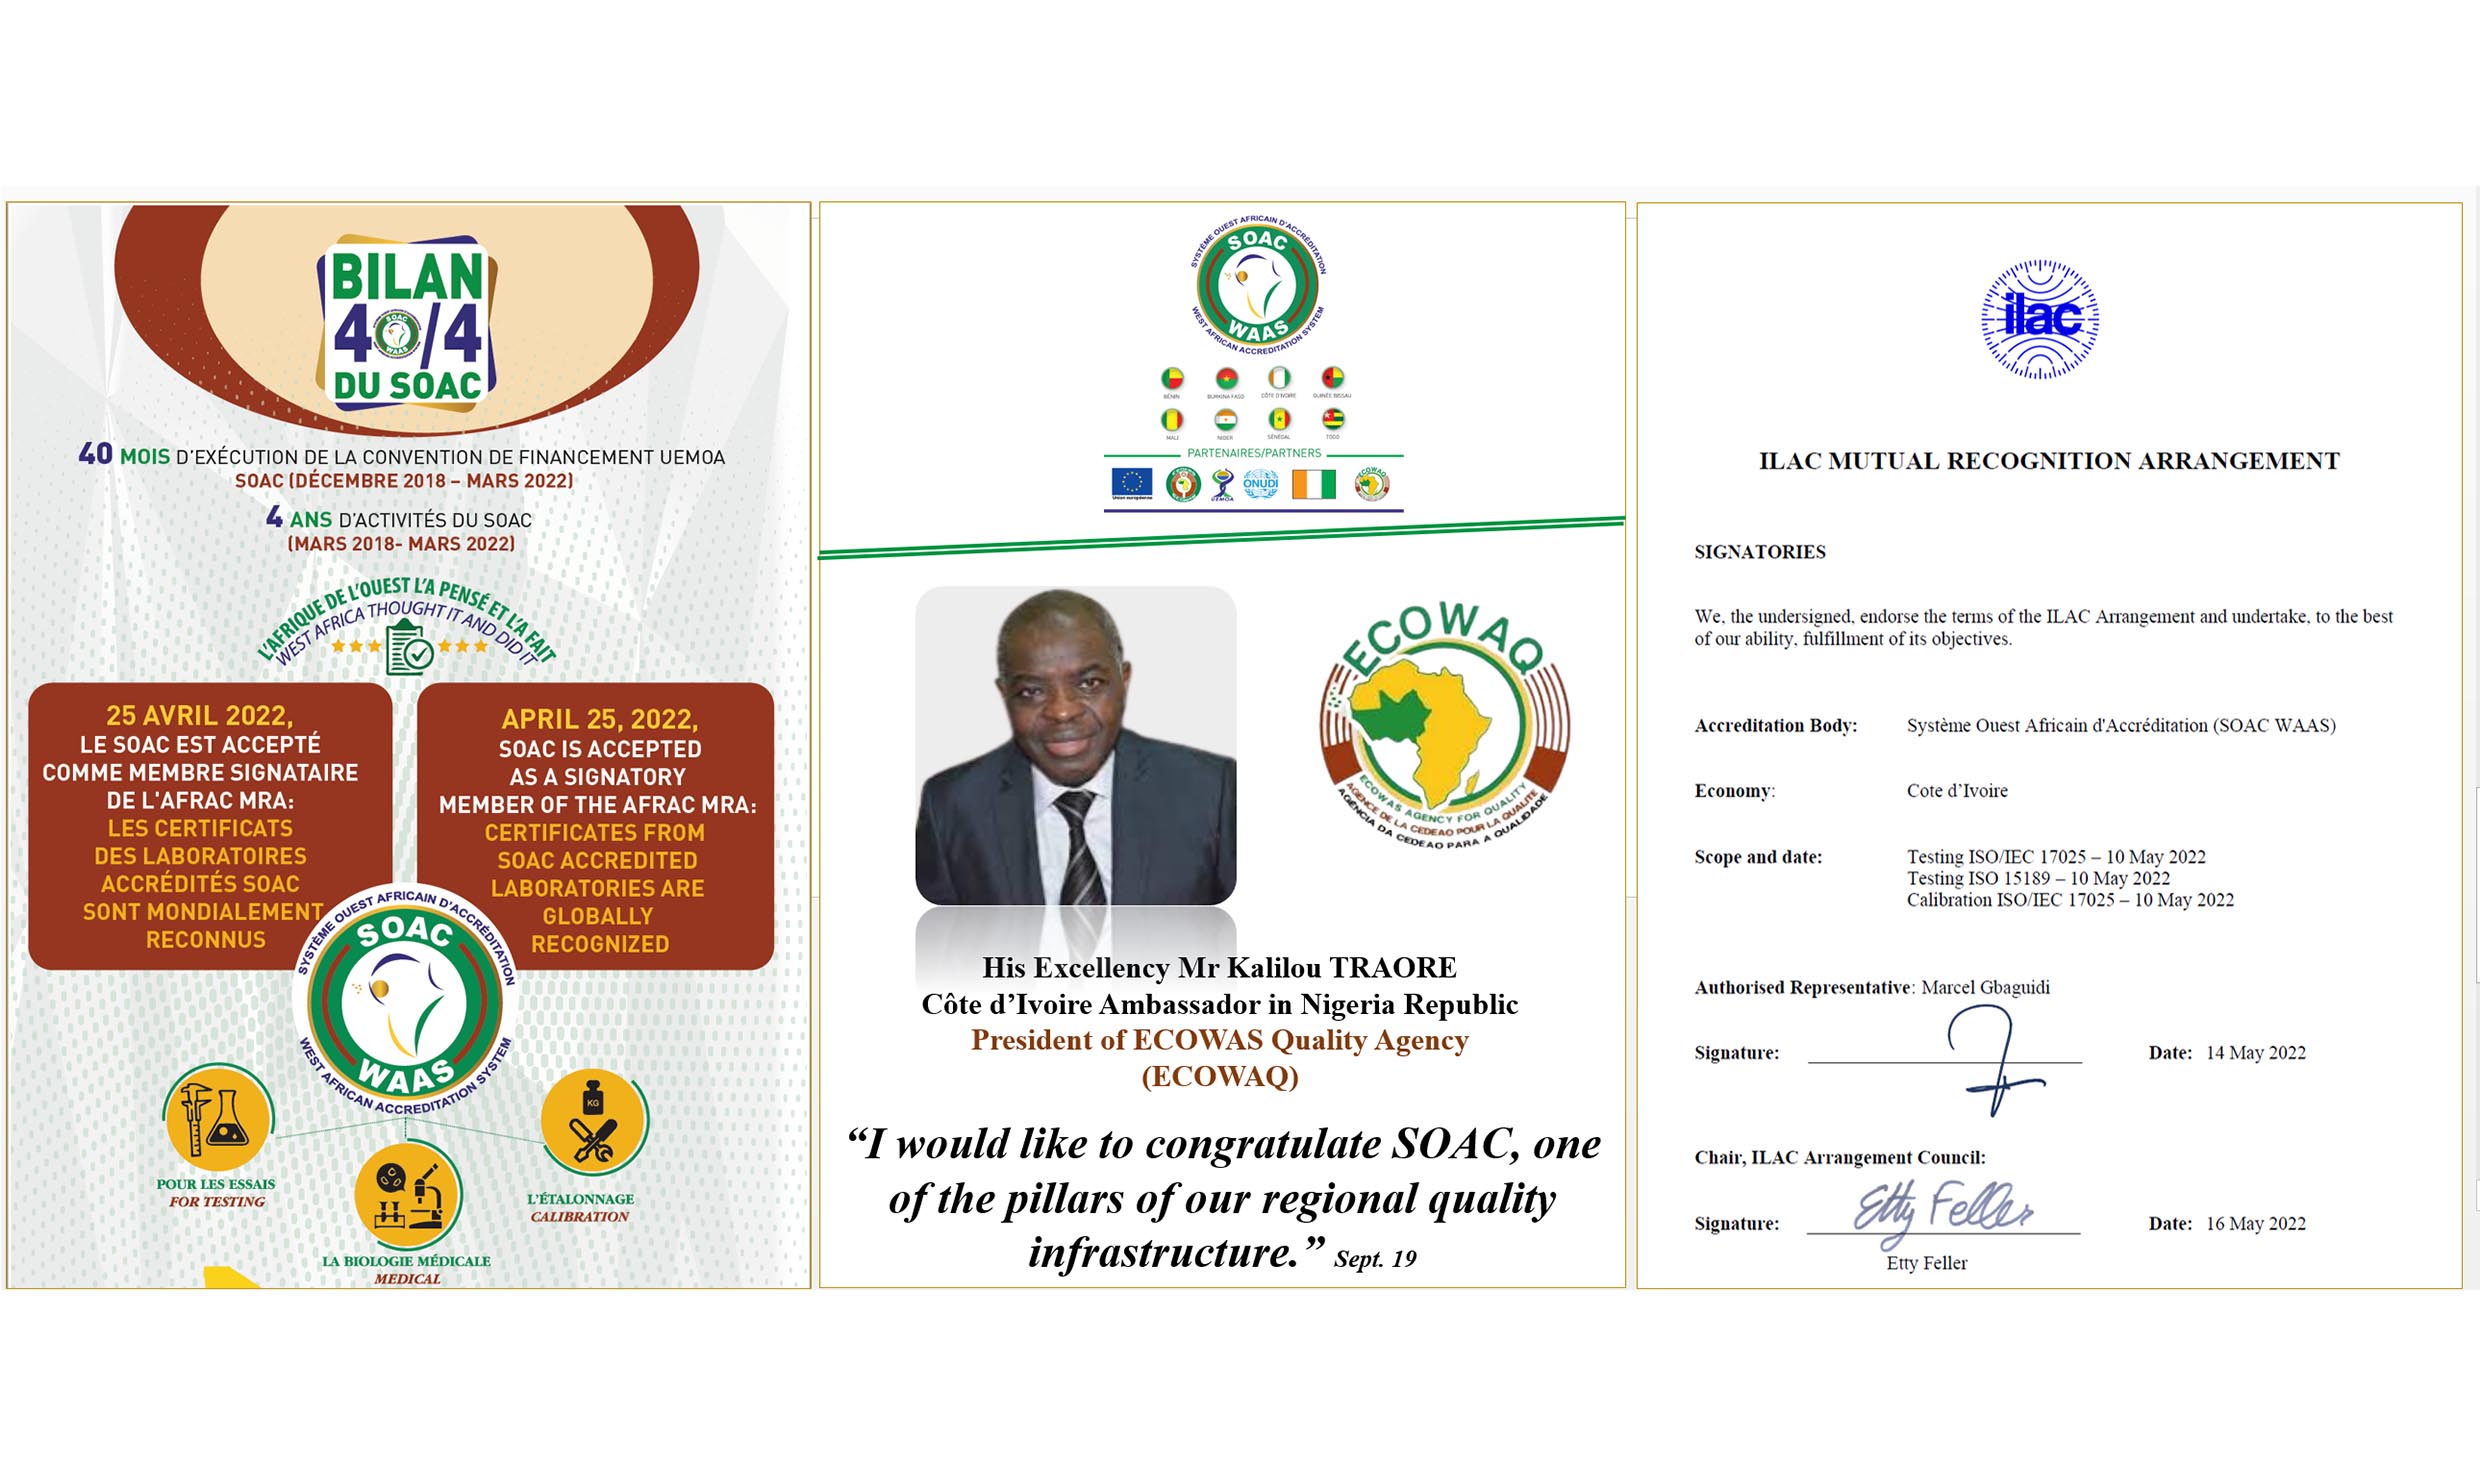 H.E Kalilou TRAORE, Côte d’Ivoire Ambassador in Nigeria, President of ECOWAS Agency for Quality (ECOWAQ)